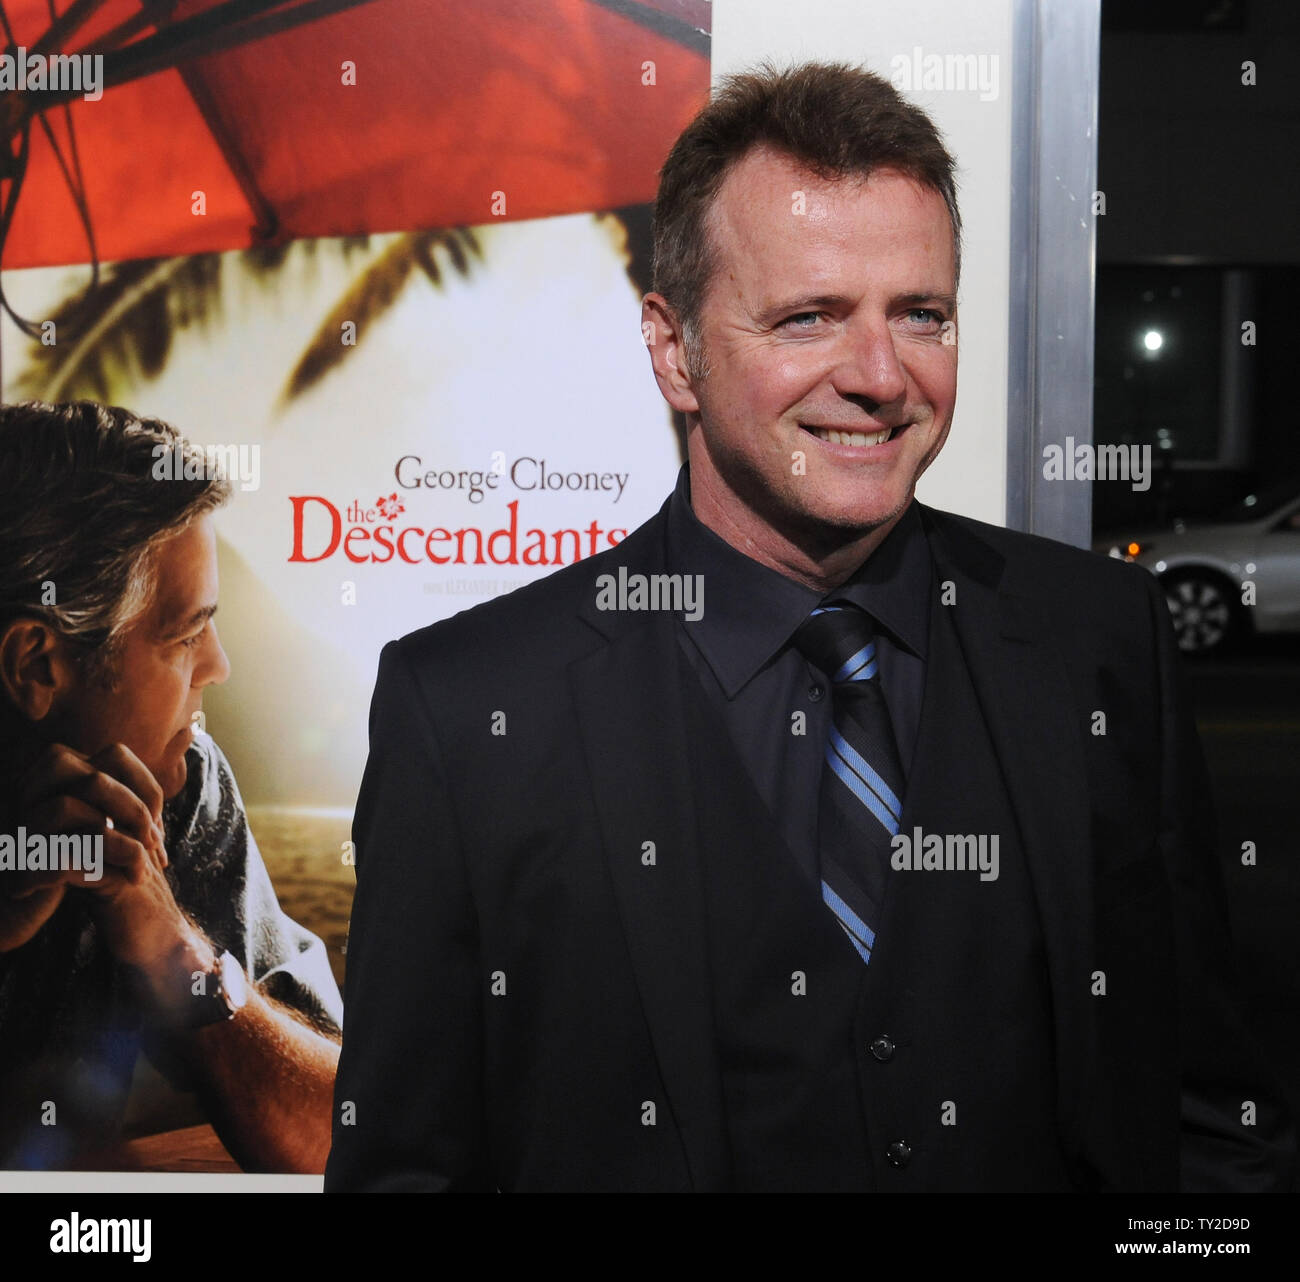 Actor Aidan Quinn attends the premiere of the motion picture dramatic comedy 'The Descendants', at the Academy of Motion Picture Arts & Sciences, in Beverly Hills on November 15, 2011.  UPI/Jim Ruymen Stock Photo